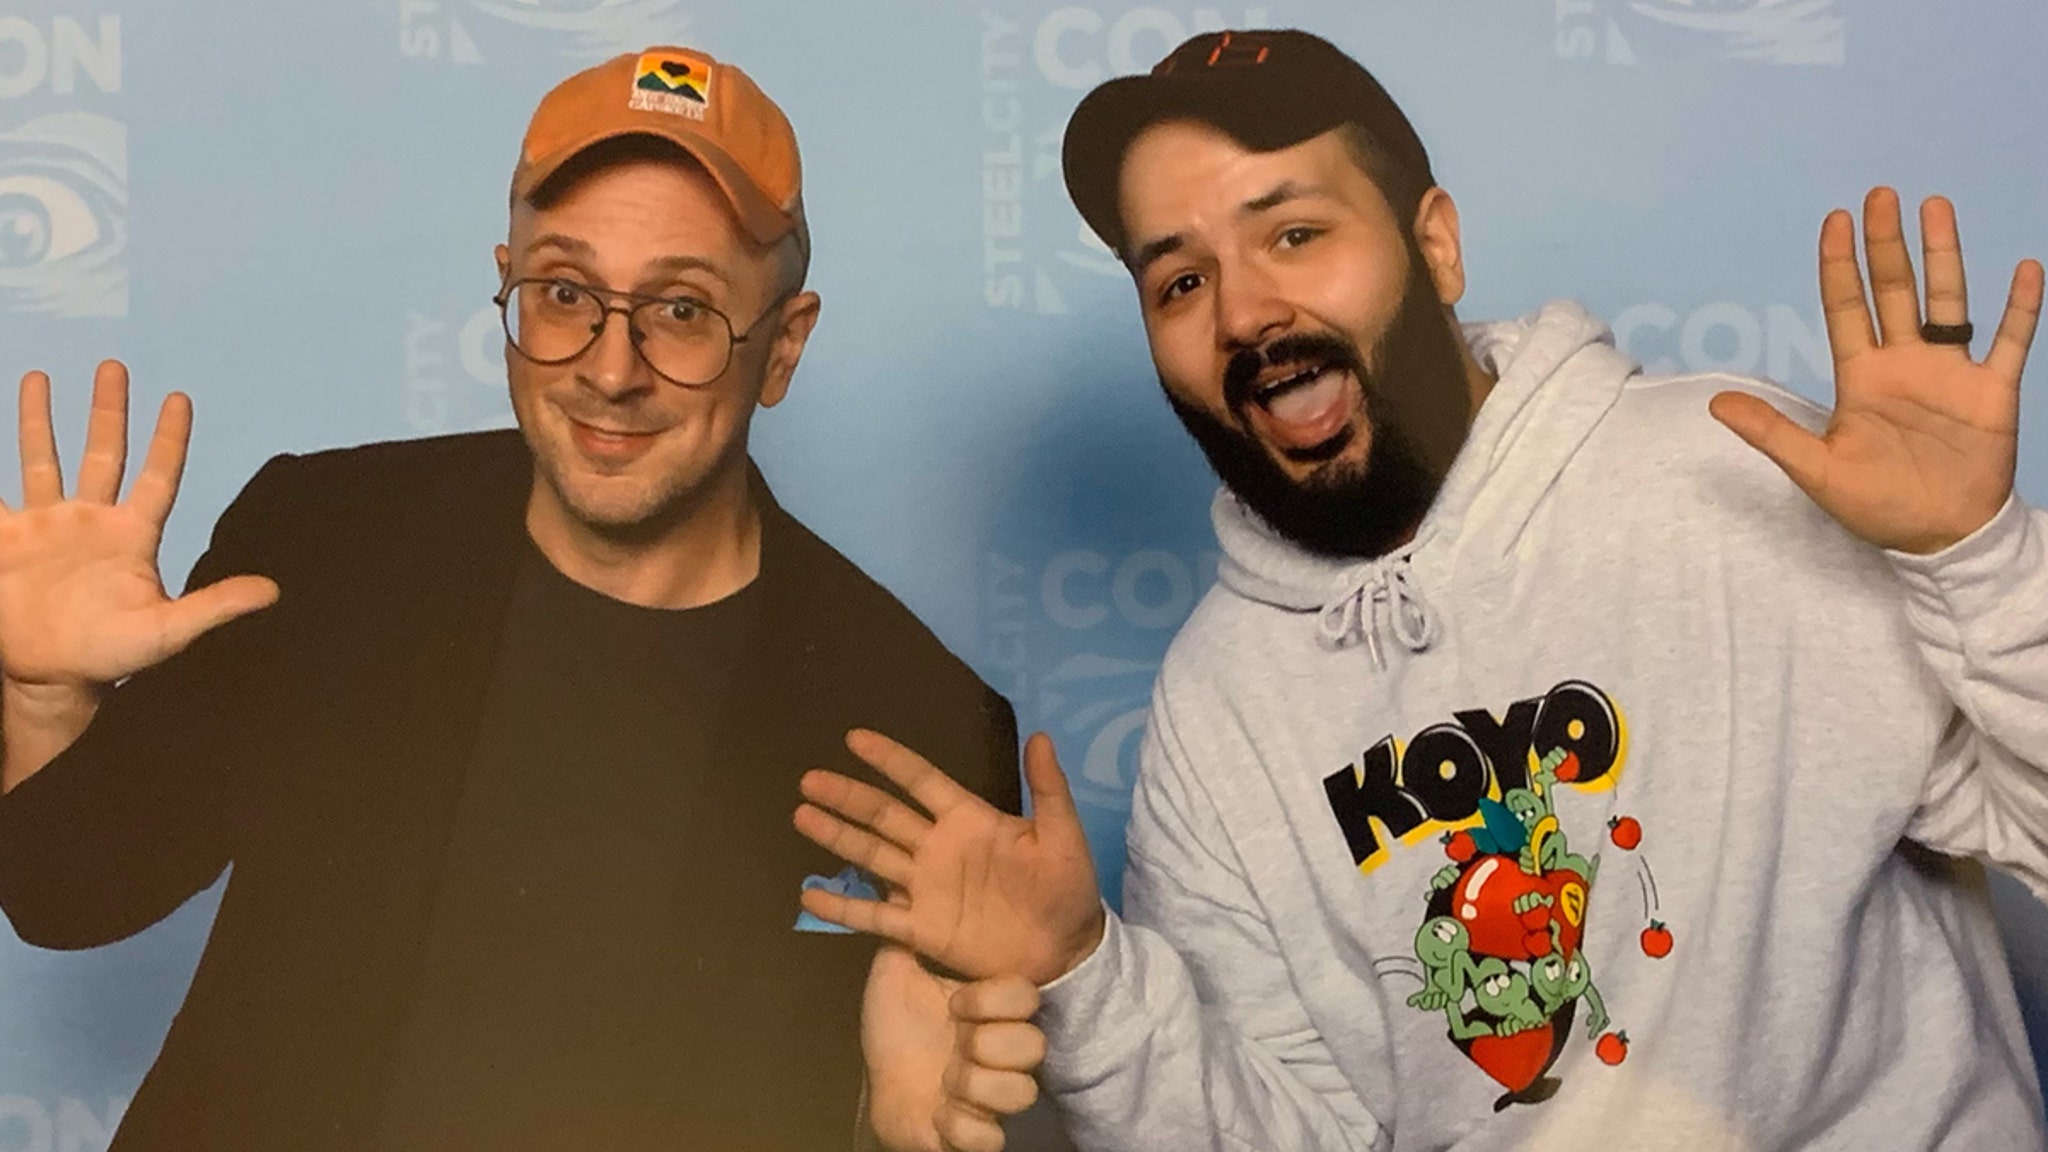 'Blue's Clues' Steve Burns Has Reunion with Make-A-Wish Patient 22 Years Later thumbnail